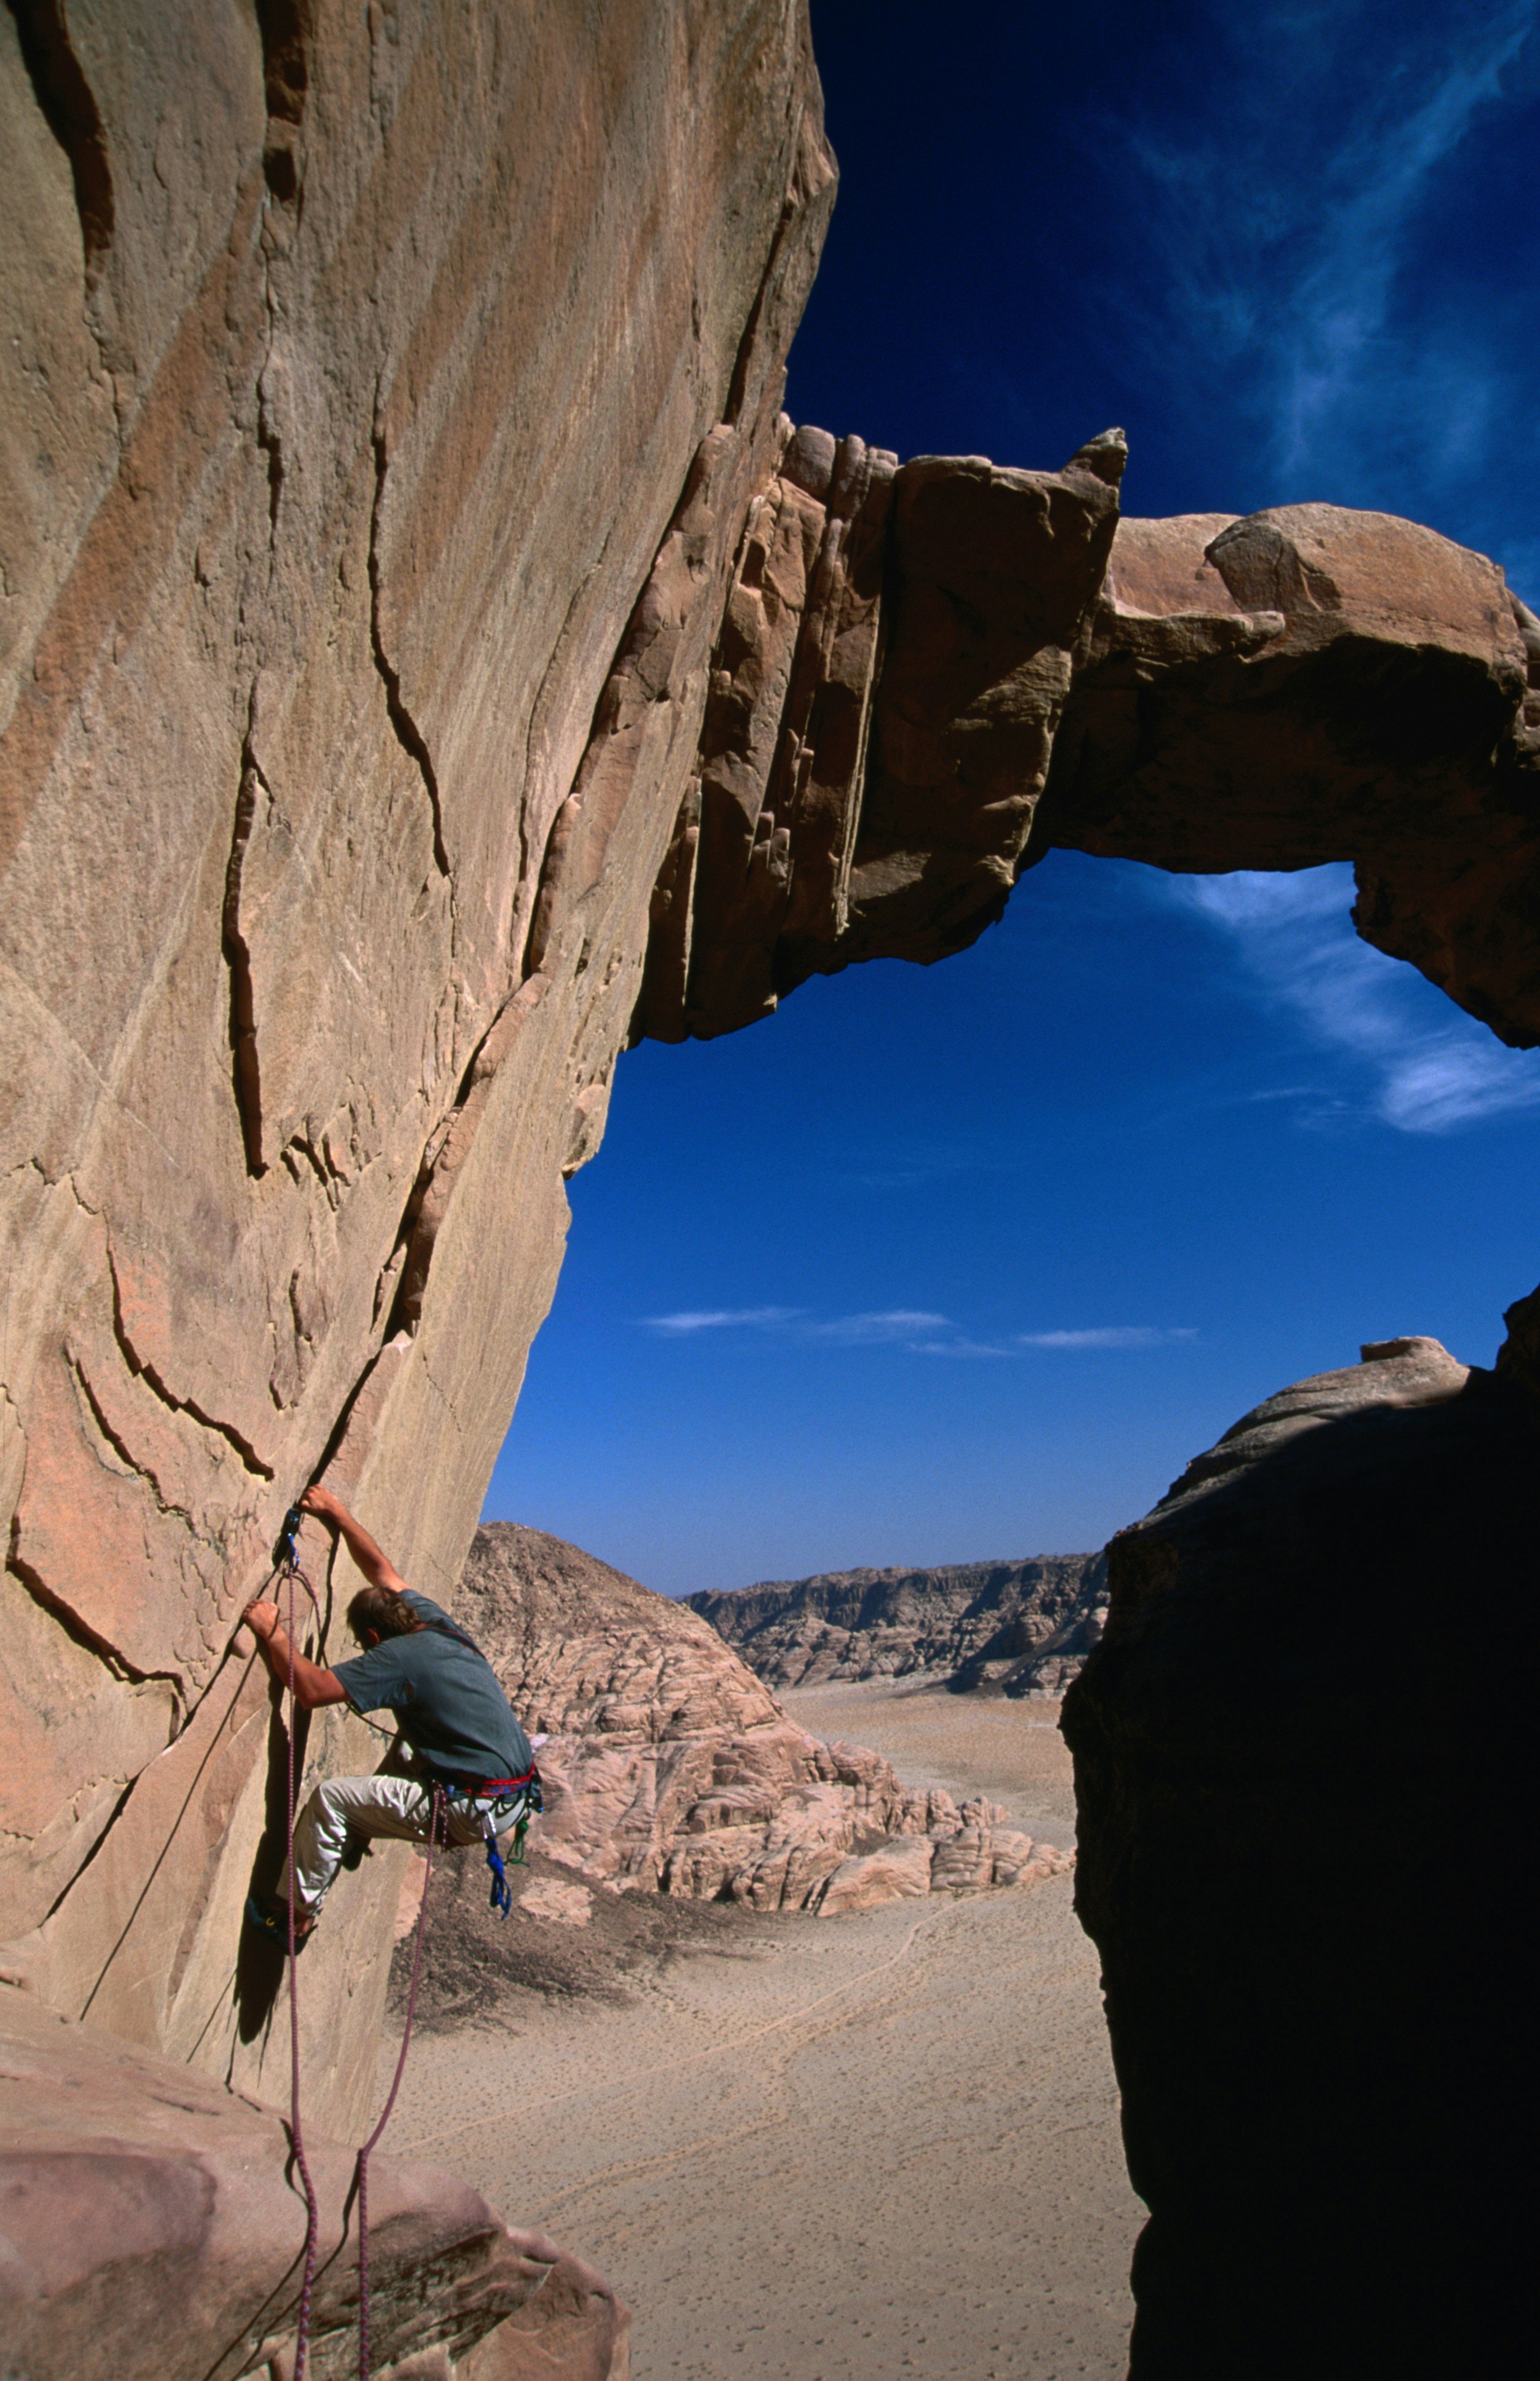 A rock climbing clings to a steeply sloping rock slab that leads up to a natural rock bridge that crests beneath a blue sky; in the distance, hundreds of feet below is the desert floor.